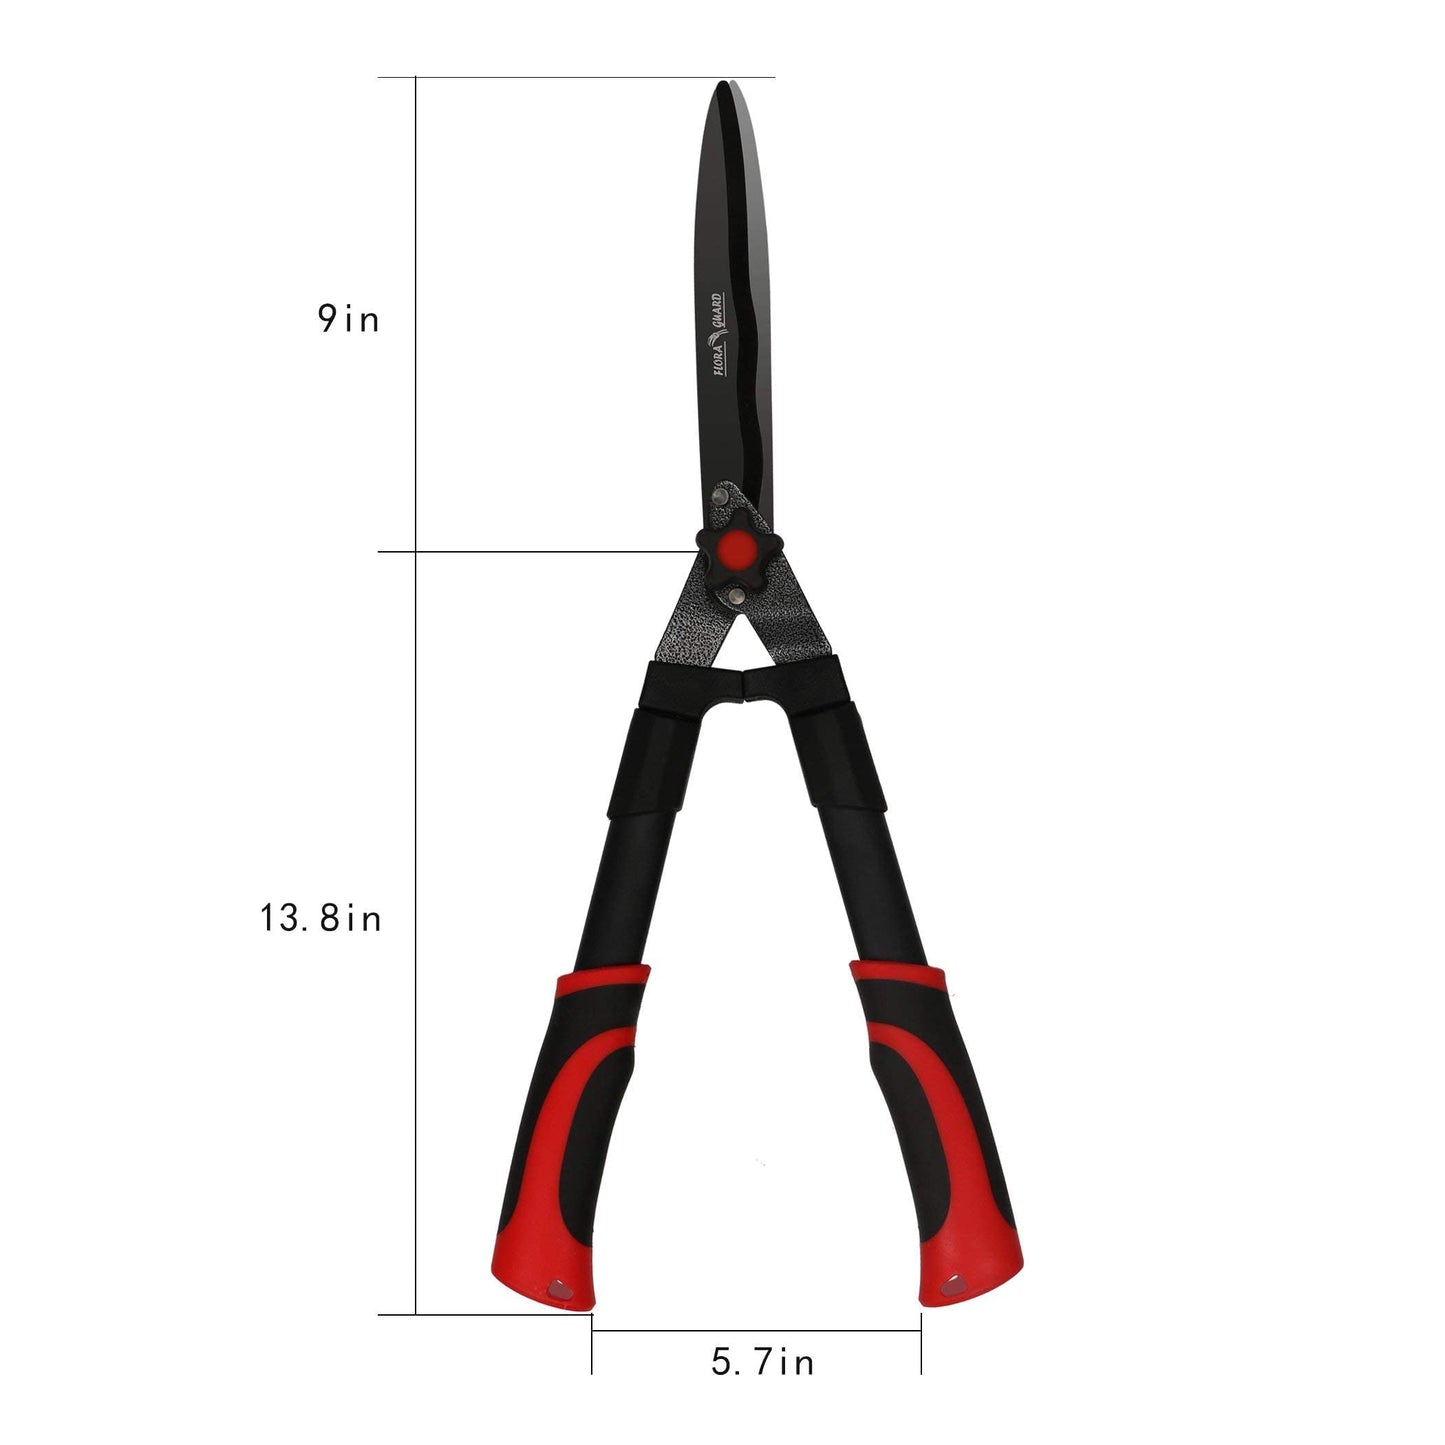 FLORA GUARD Hedge Shears-23 Inches in Length - Carbon Steel Blades with Soft Handle